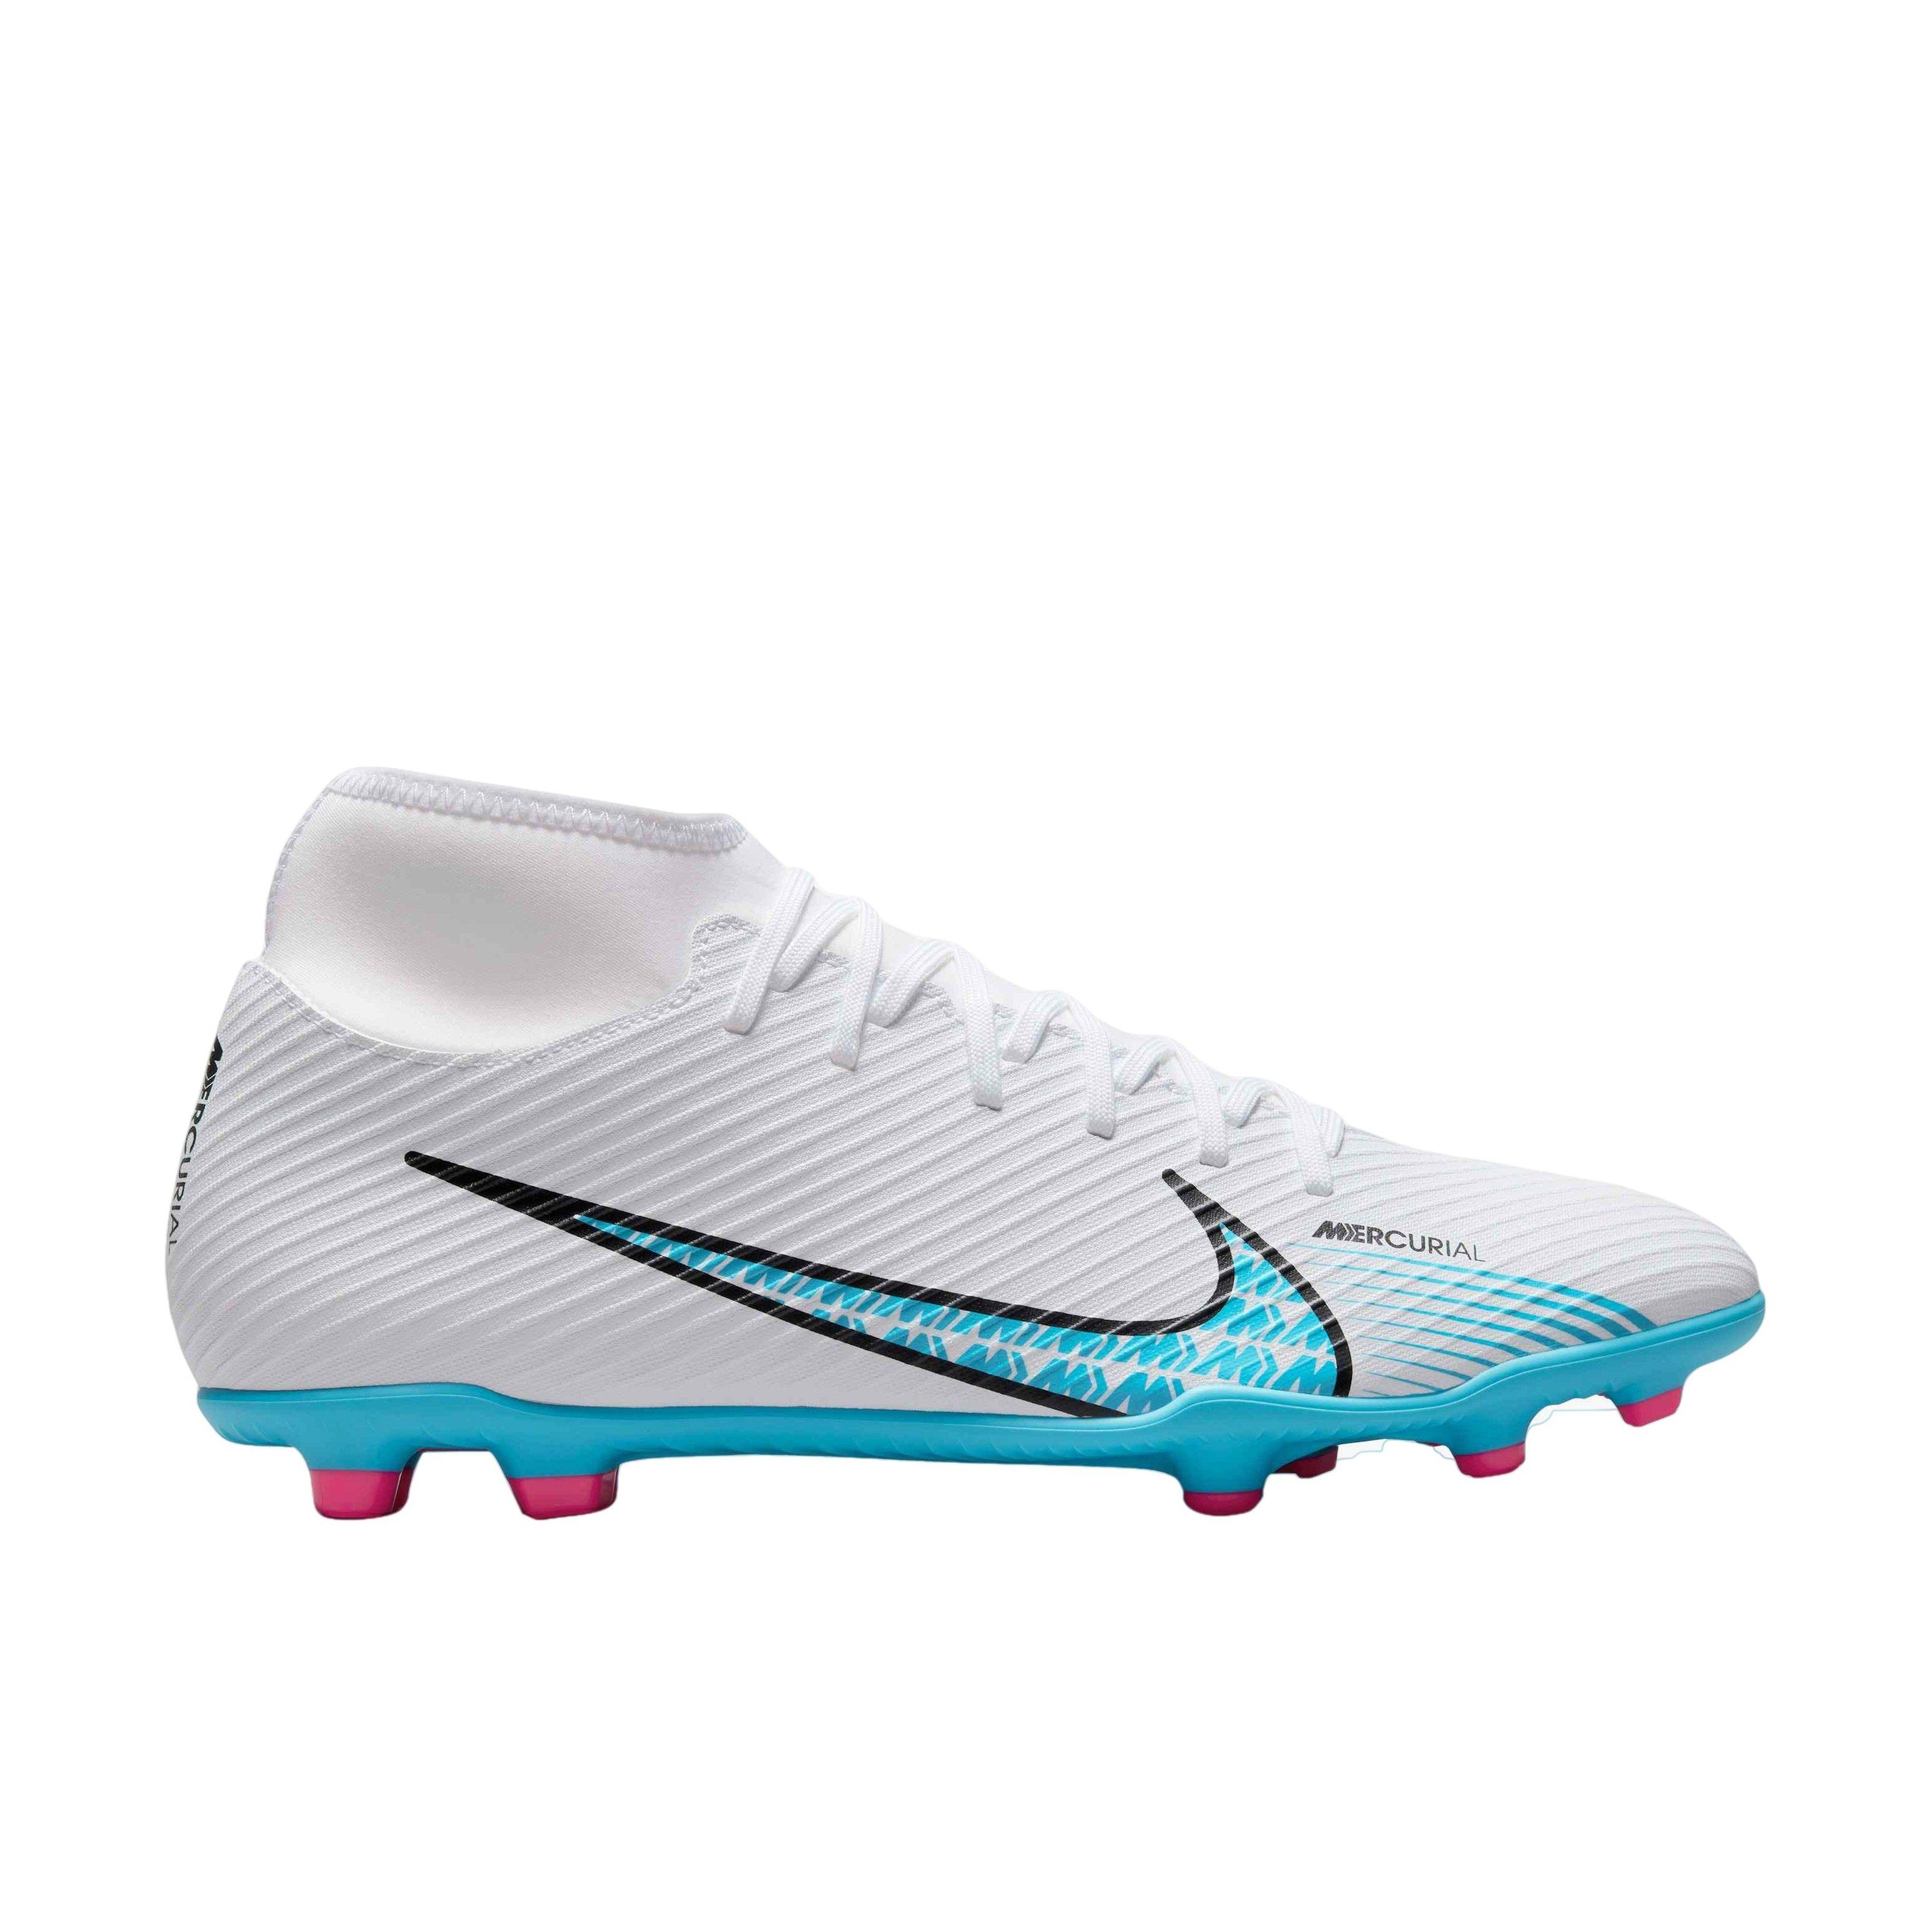 Nike Mercurial Superfly 9 Club "White/Baltic Blue/Pink Blast" Soccer Cleat